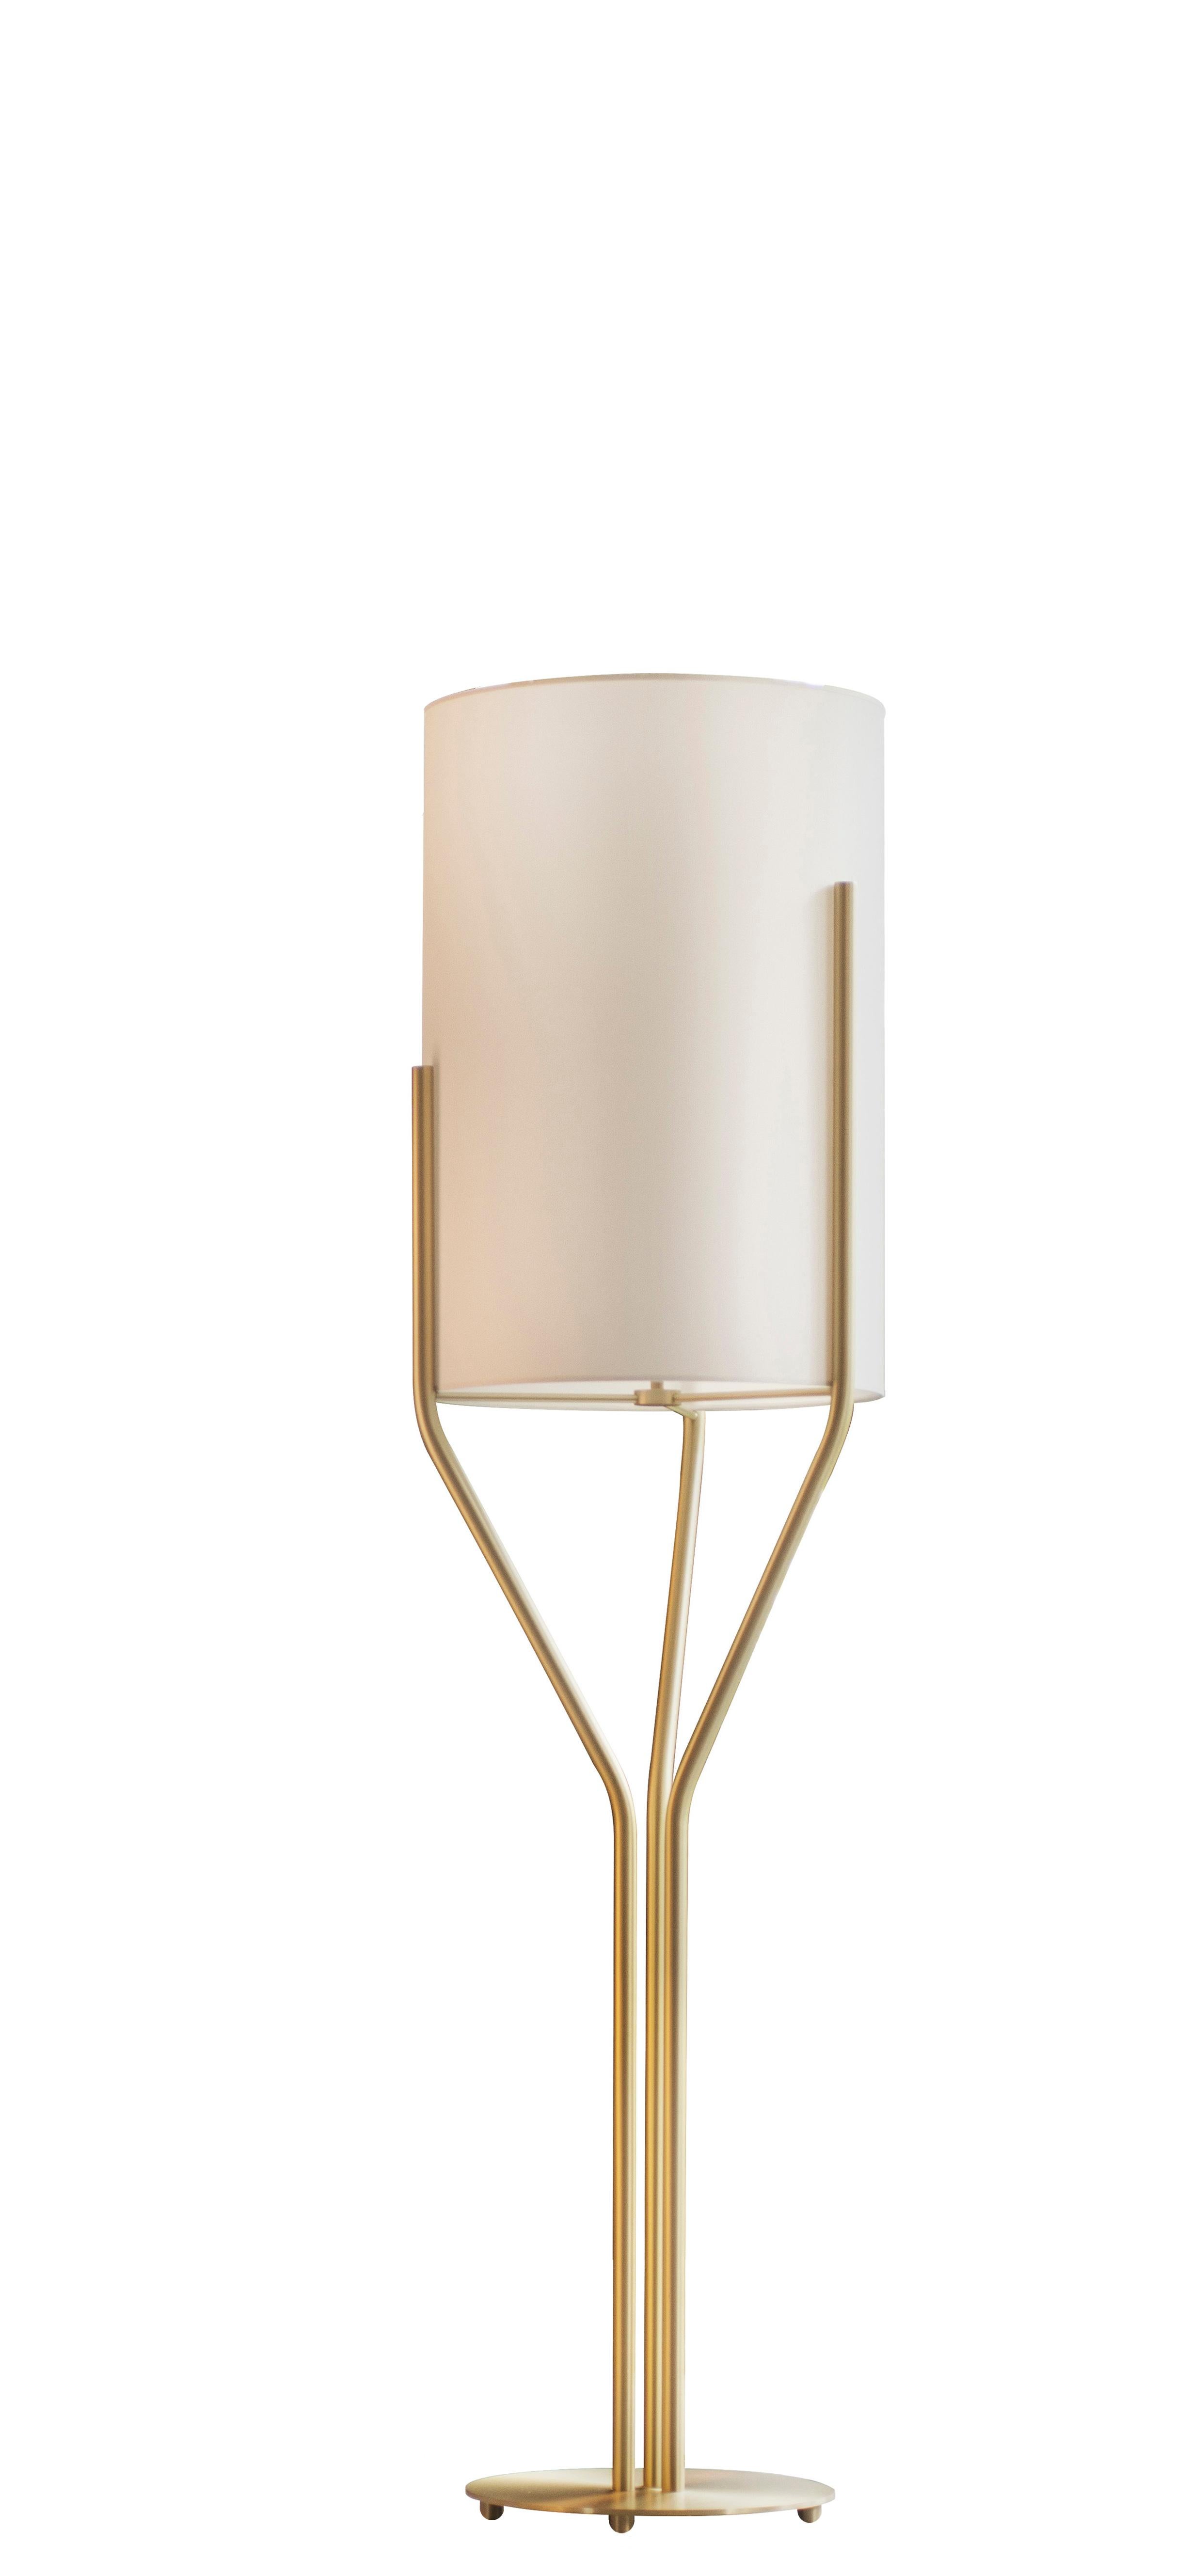 French Set of 3 Arborescence Satin Brass Floor Lamps by Hervé Langlais